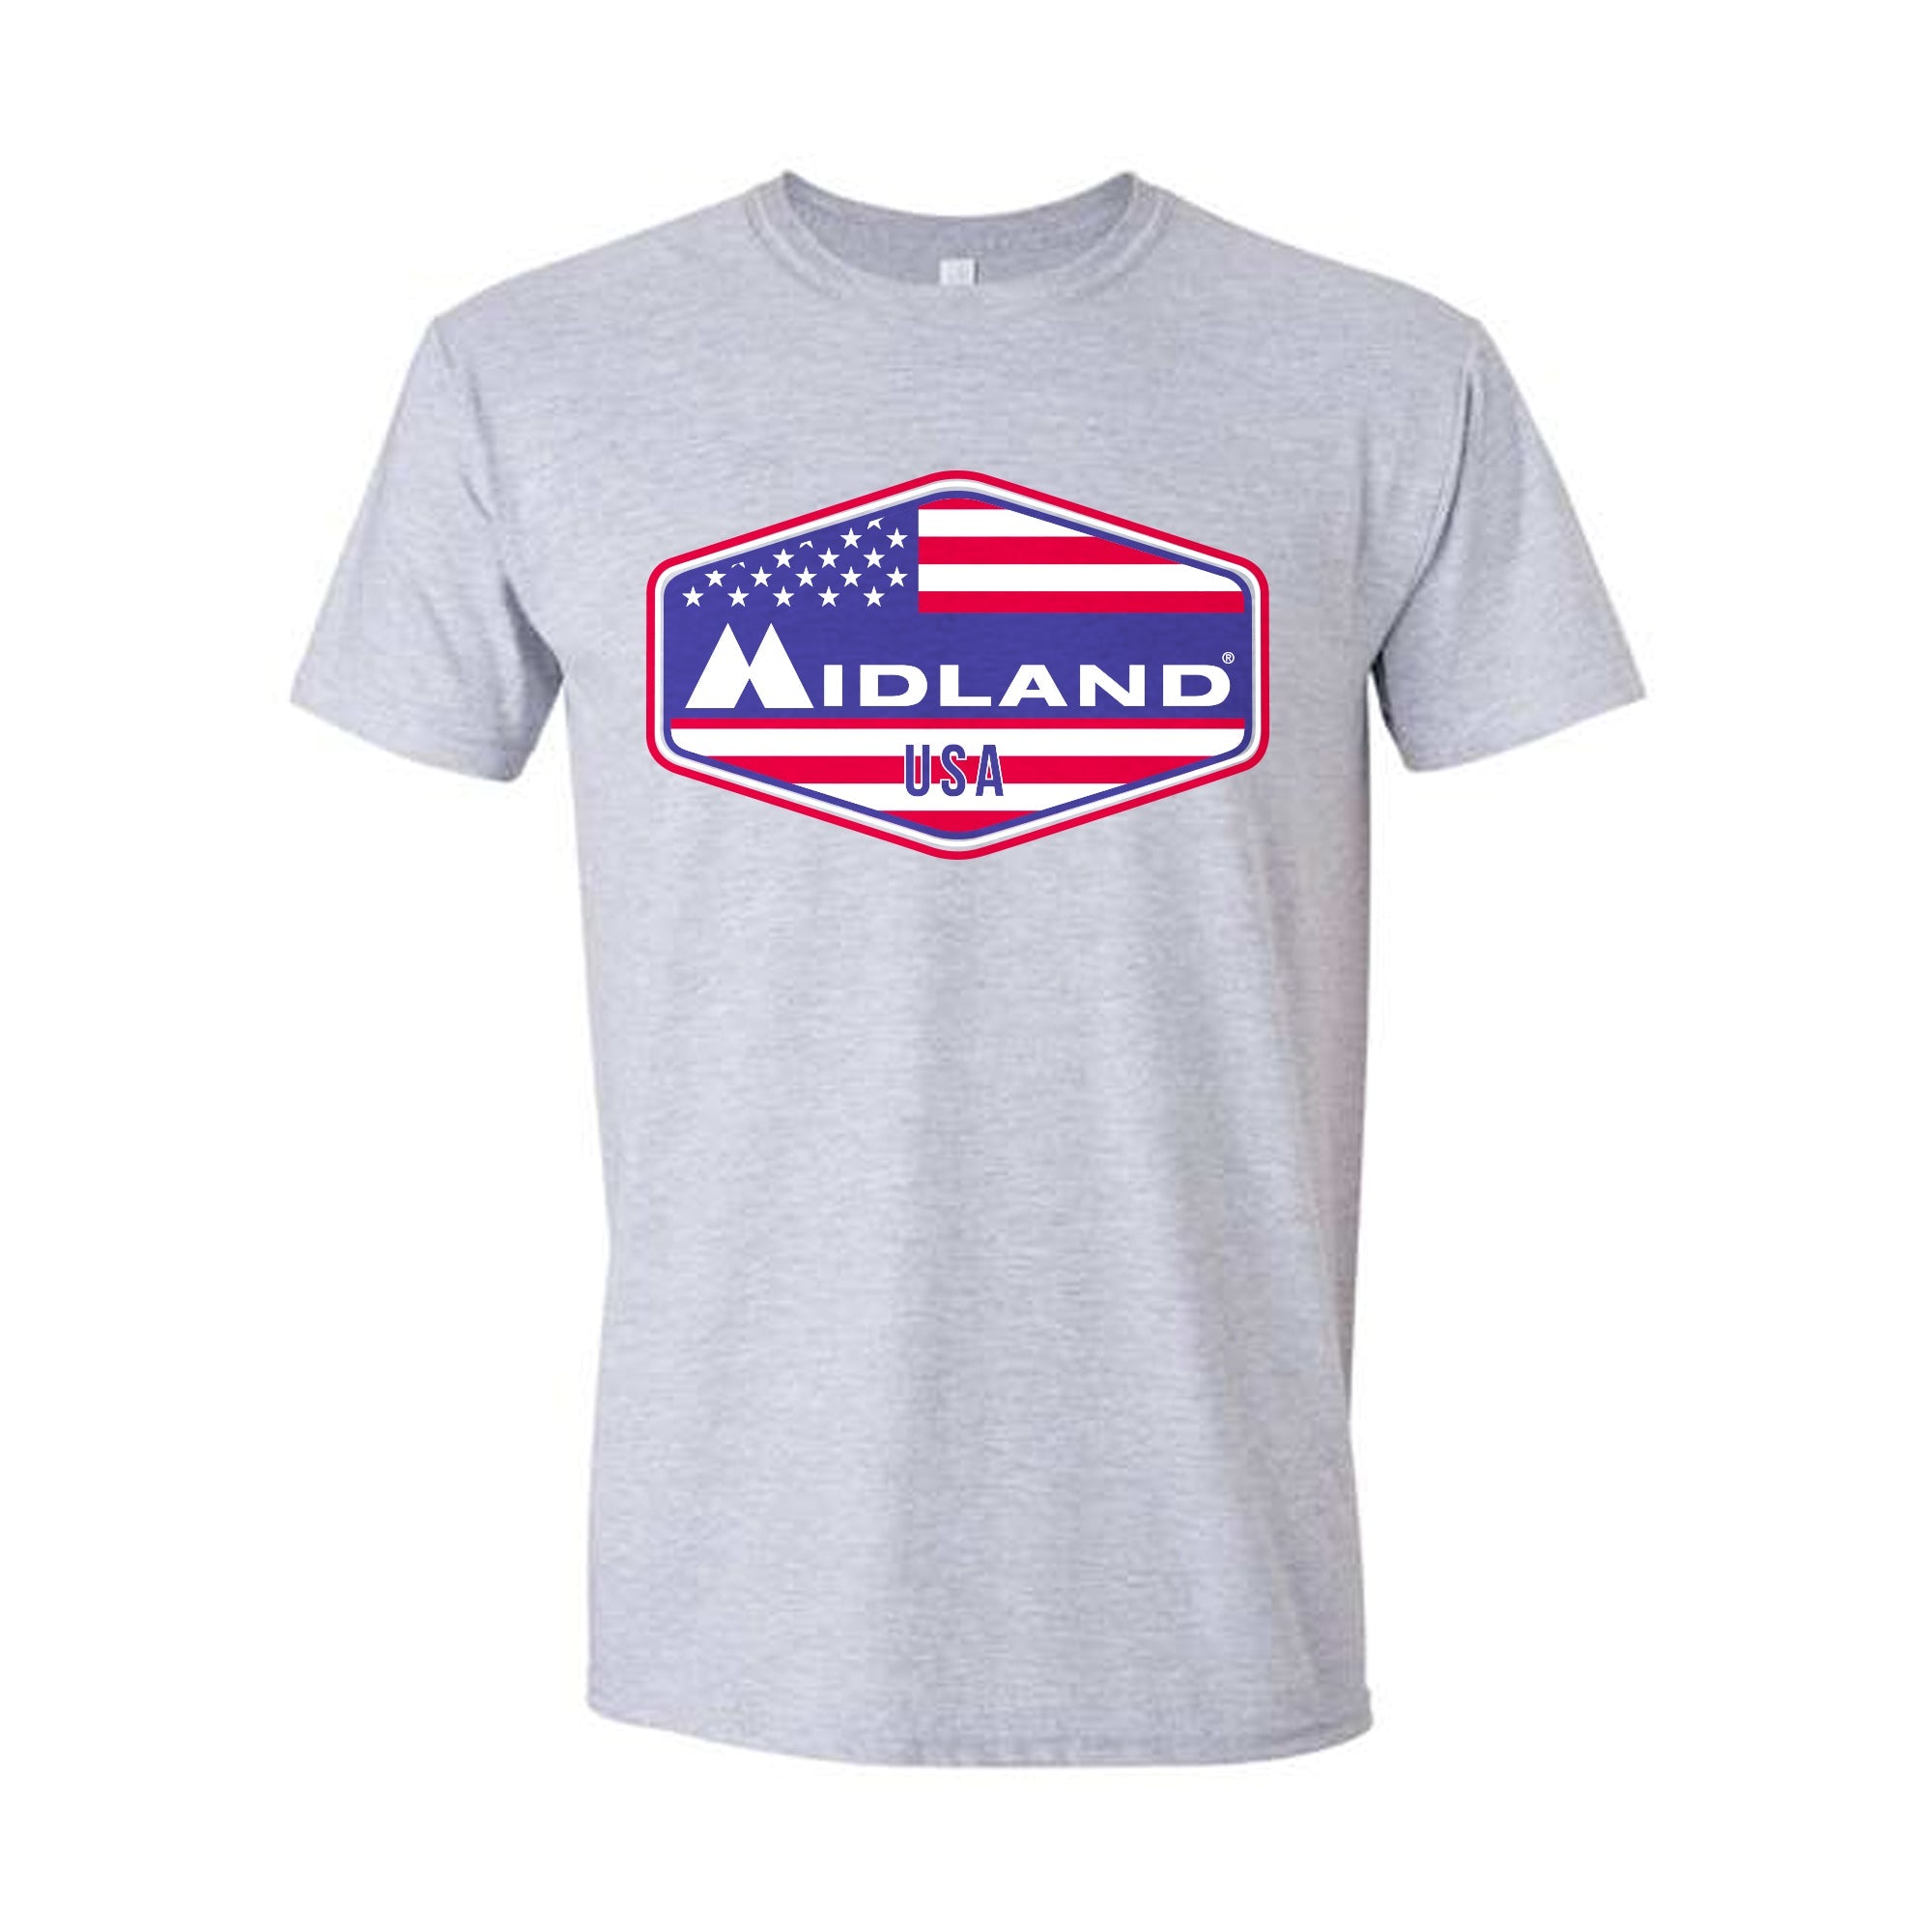 Midland Red, White, and Blue T-Shirt